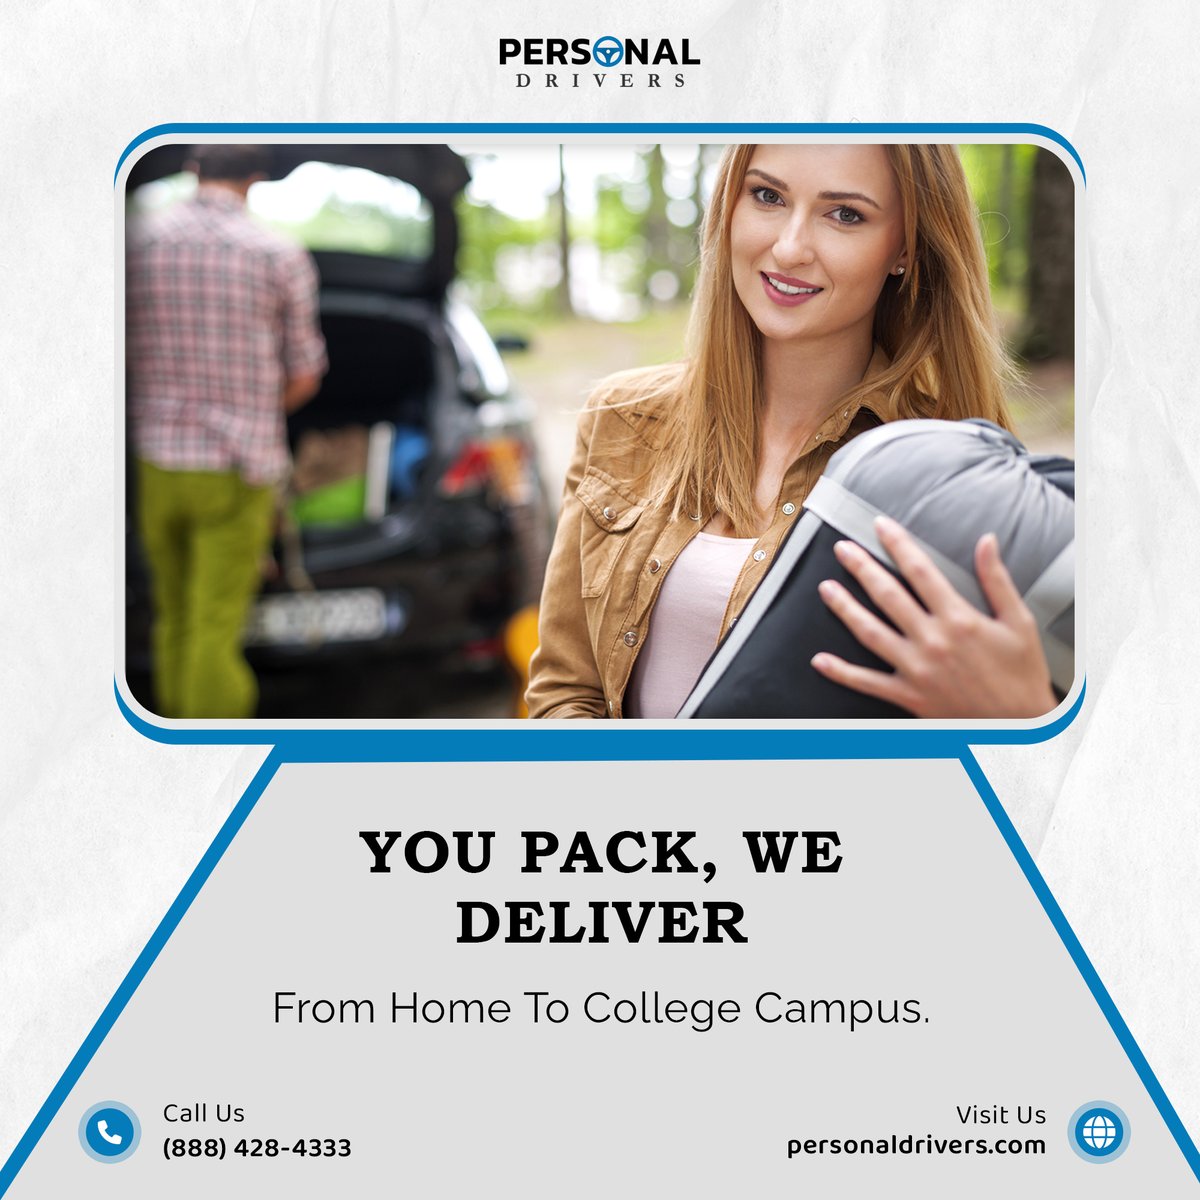 Heading to #College?🎓 We make car relocations to campus as easy as a study session! Pack up, we’ll deliver. Call PERSONAL DRIVERS now!🚗💨
#VehicleRelocation #hireadriver #cardelivery #cardeliveryservice #personaldriver